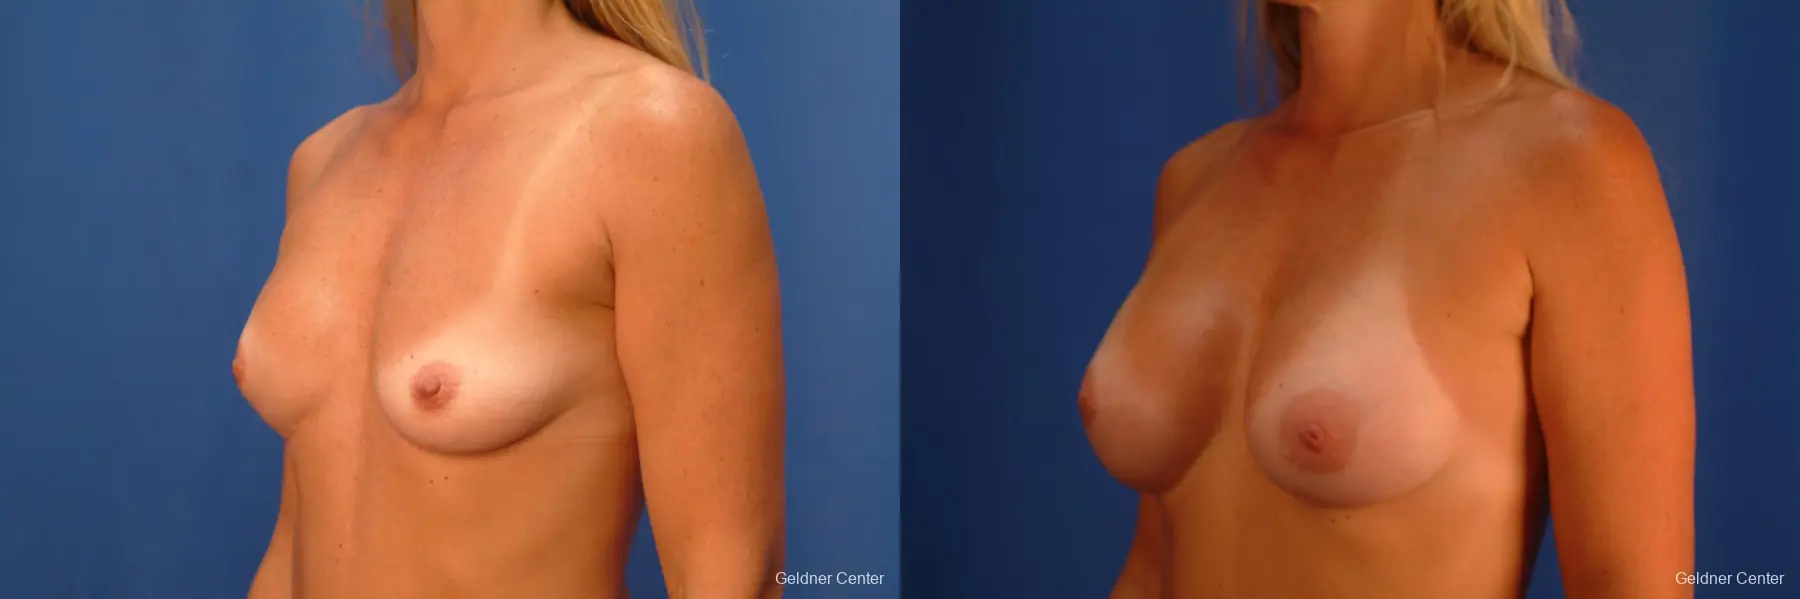 Complex Breast Augmentation Lake Shore Dr, Chicago 2419 - Before and After 3